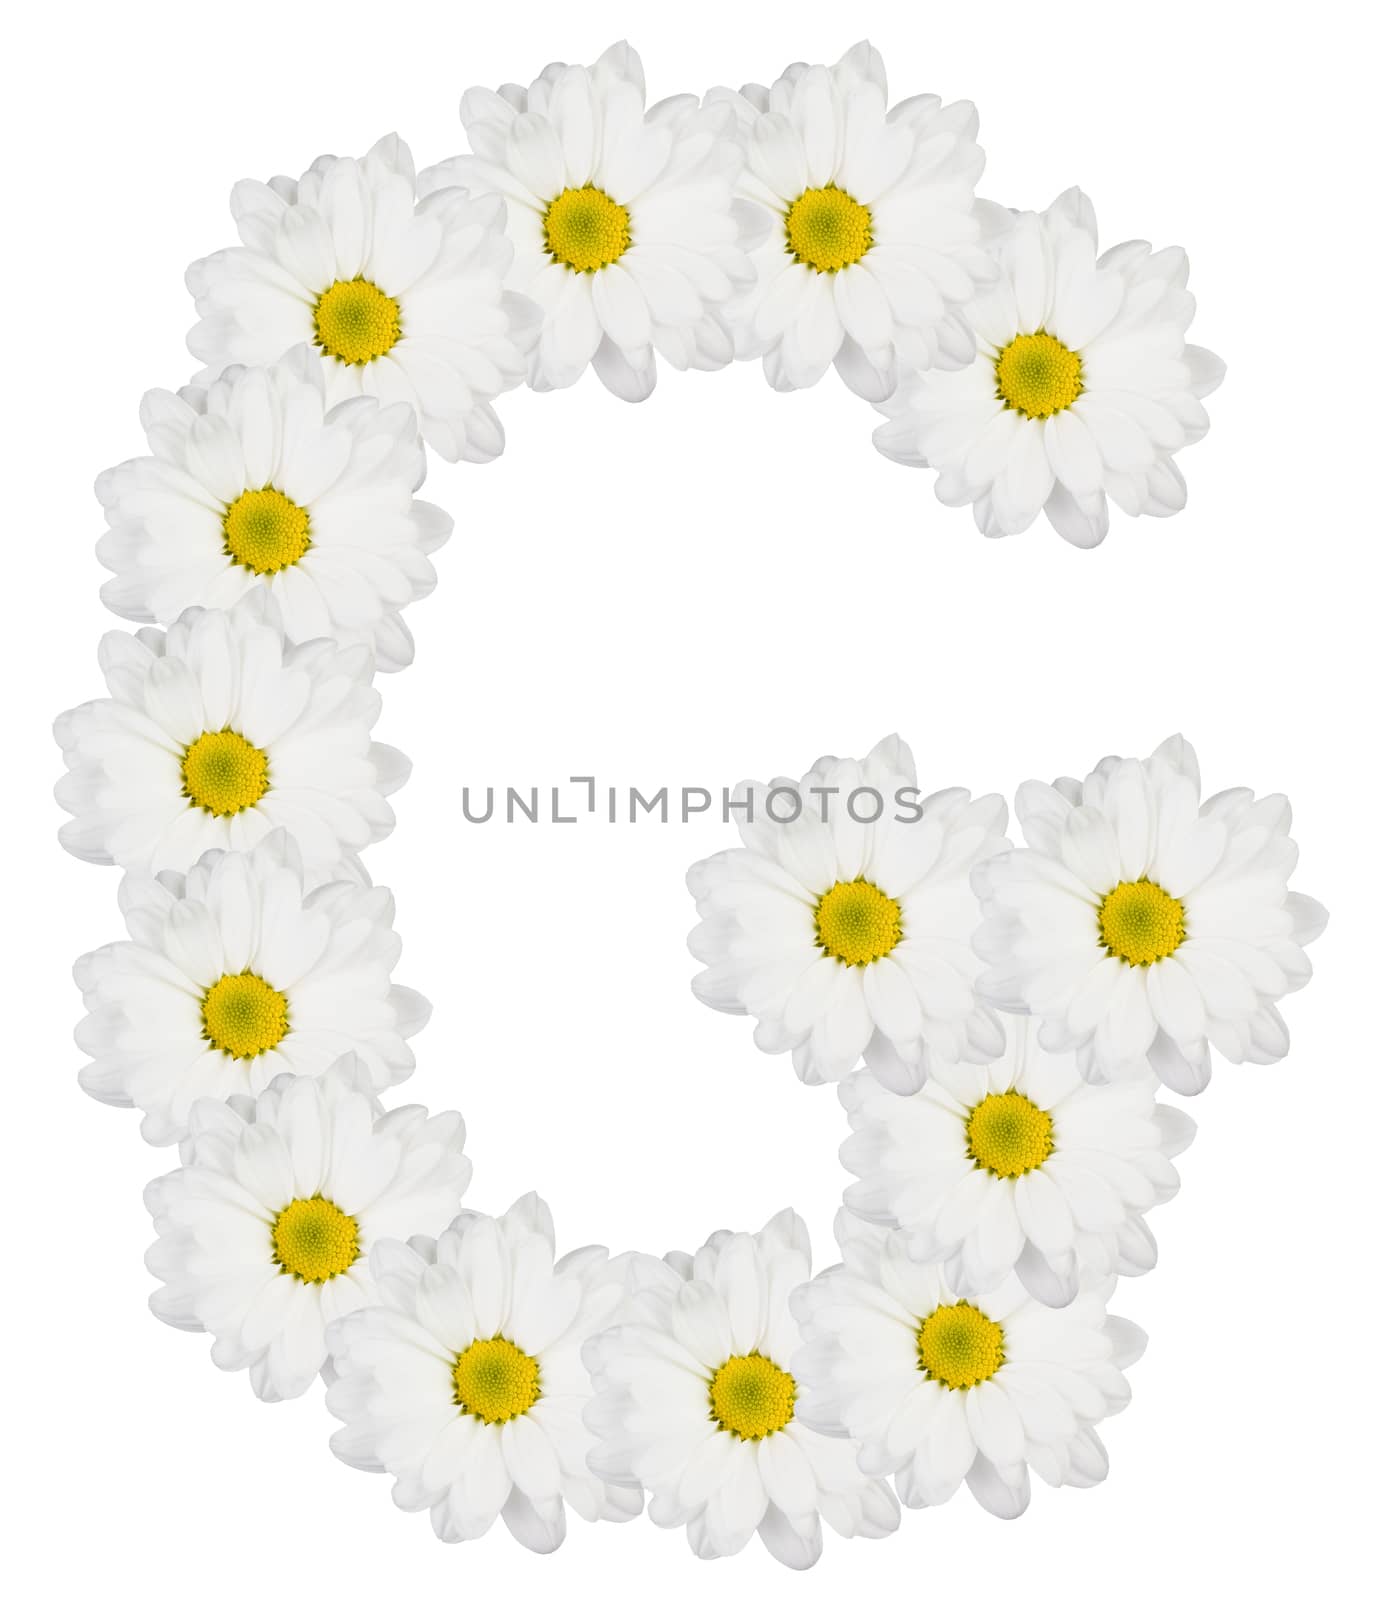 Letter G made from white flowers